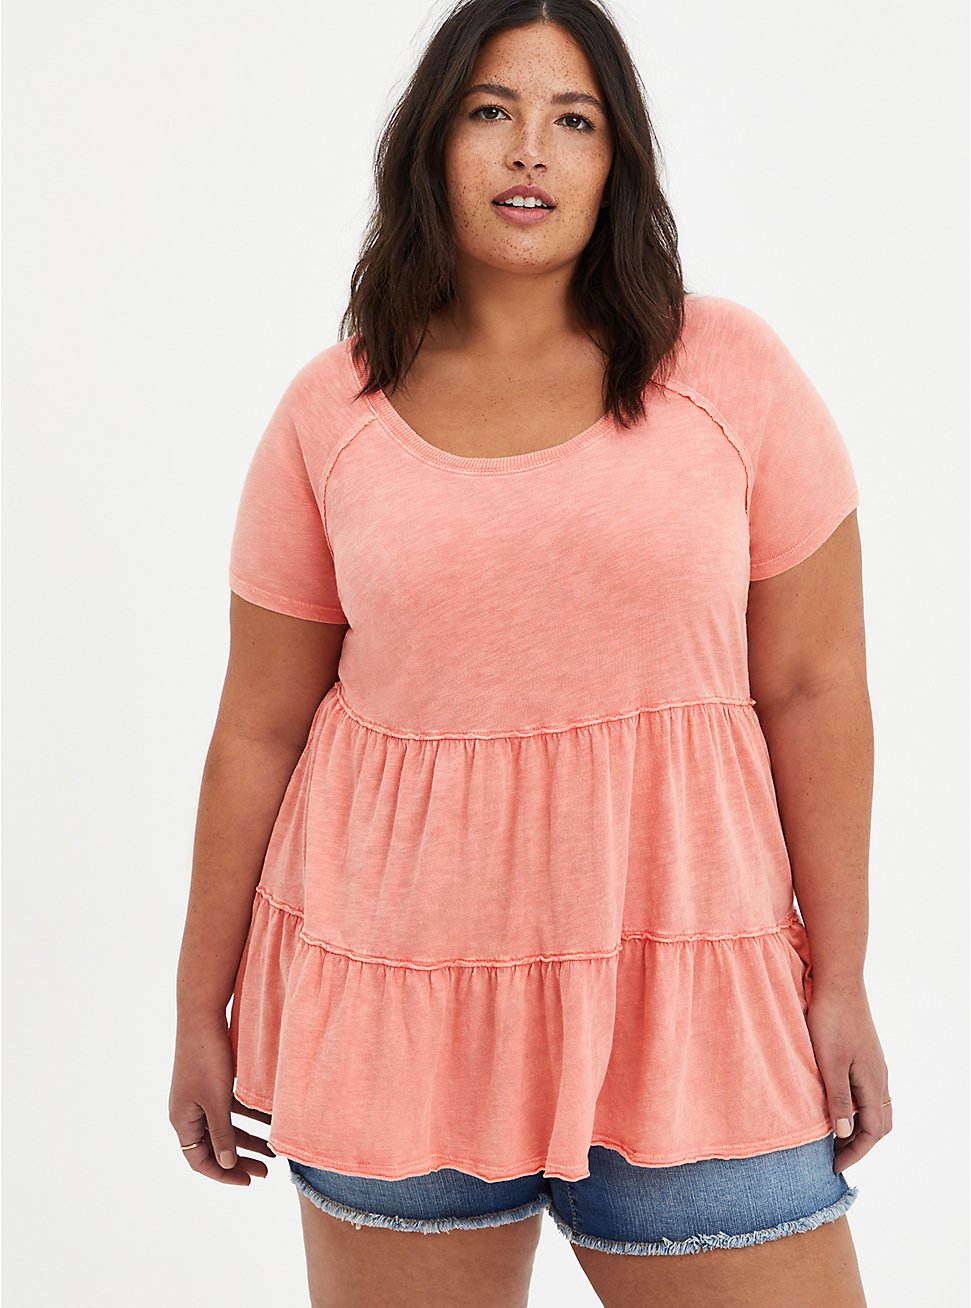 Plus Size Tiered Babydoll Top - Mineral Wash Coral, CORAL, hi-res